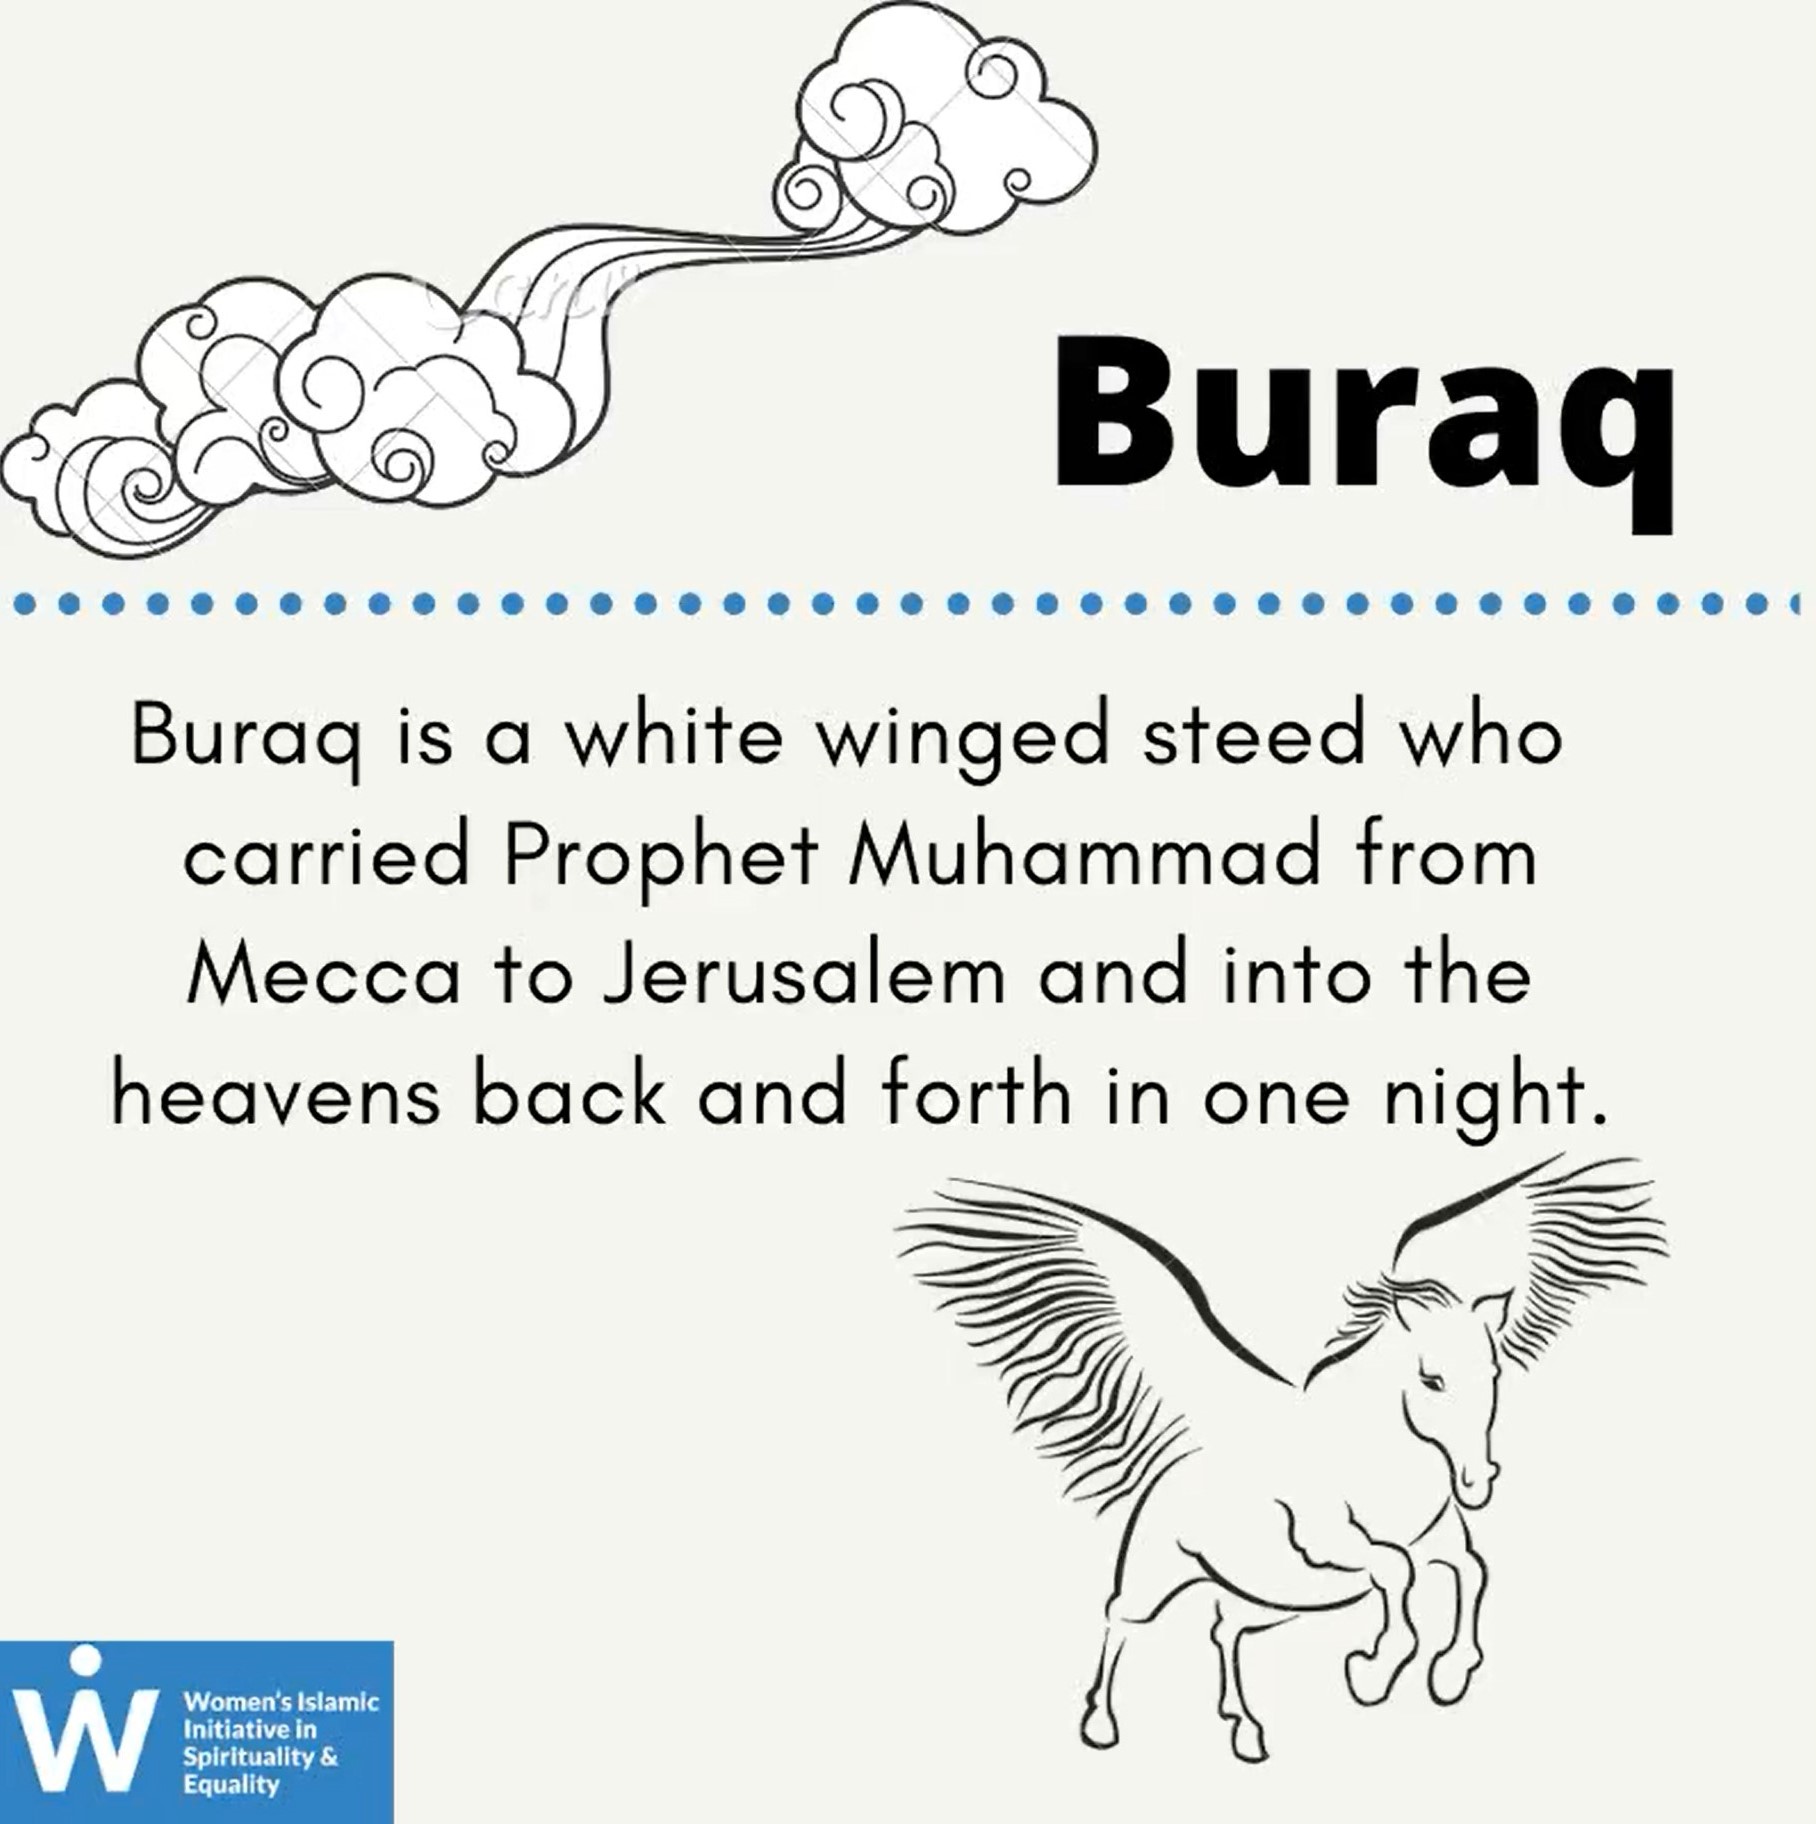 &quot;Buraq: Buraq is a white winged steed who carried Prophet Muhammad from Mecca to Jerusalem and into the heavens back and forth in one night.&quot;